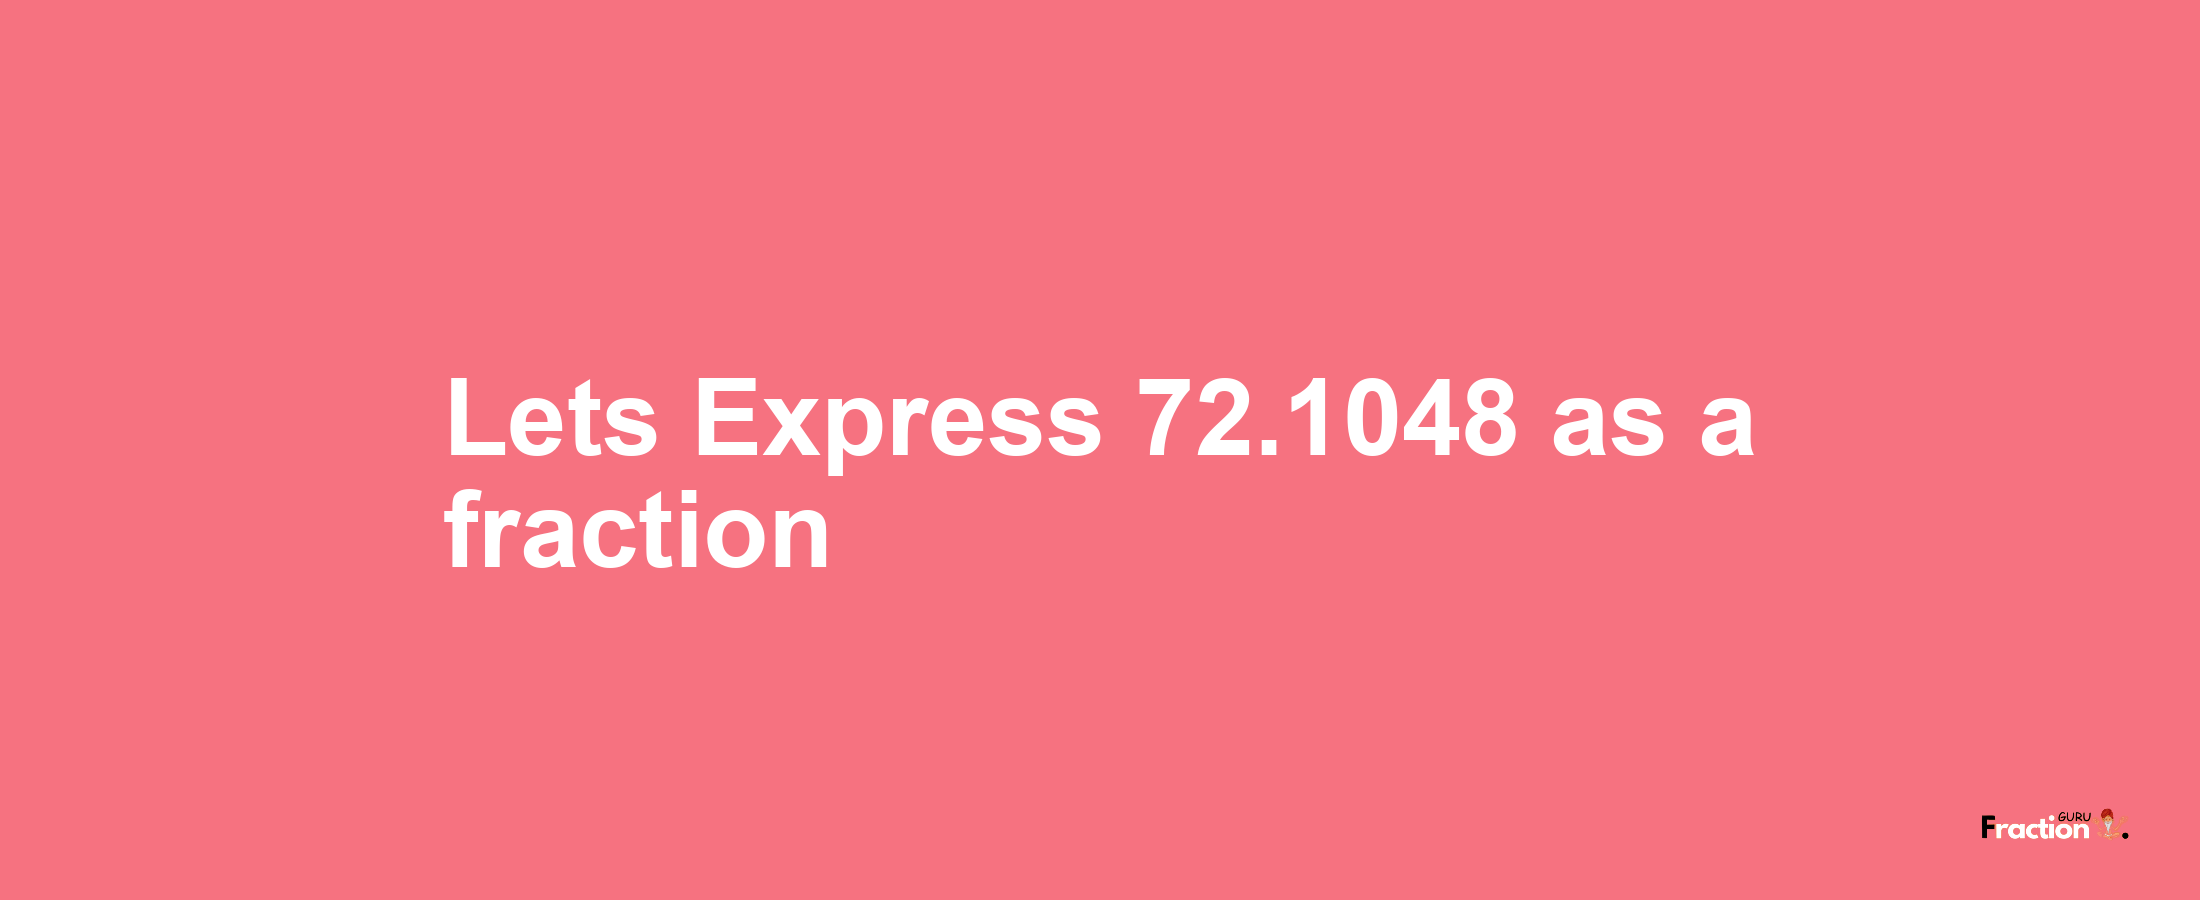 Lets Express 72.1048 as afraction